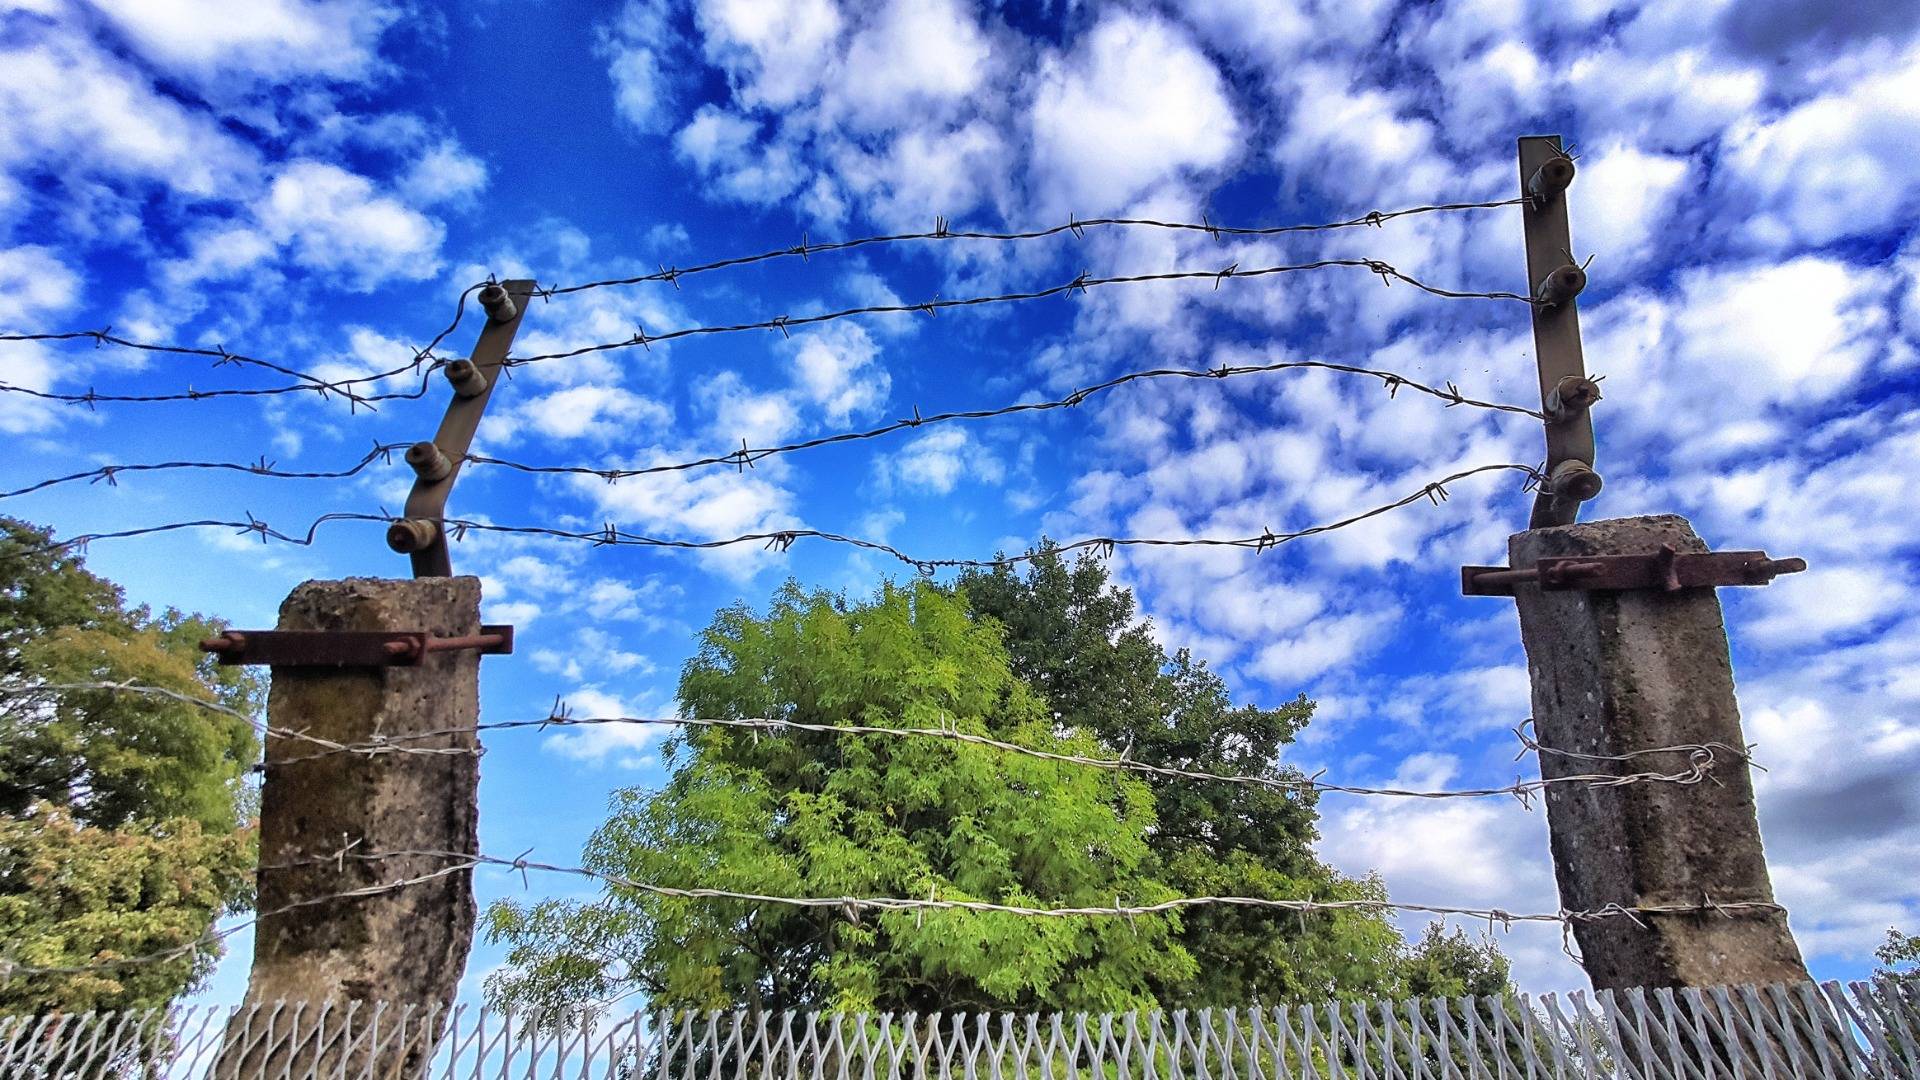 Blue sky, barbed wire.